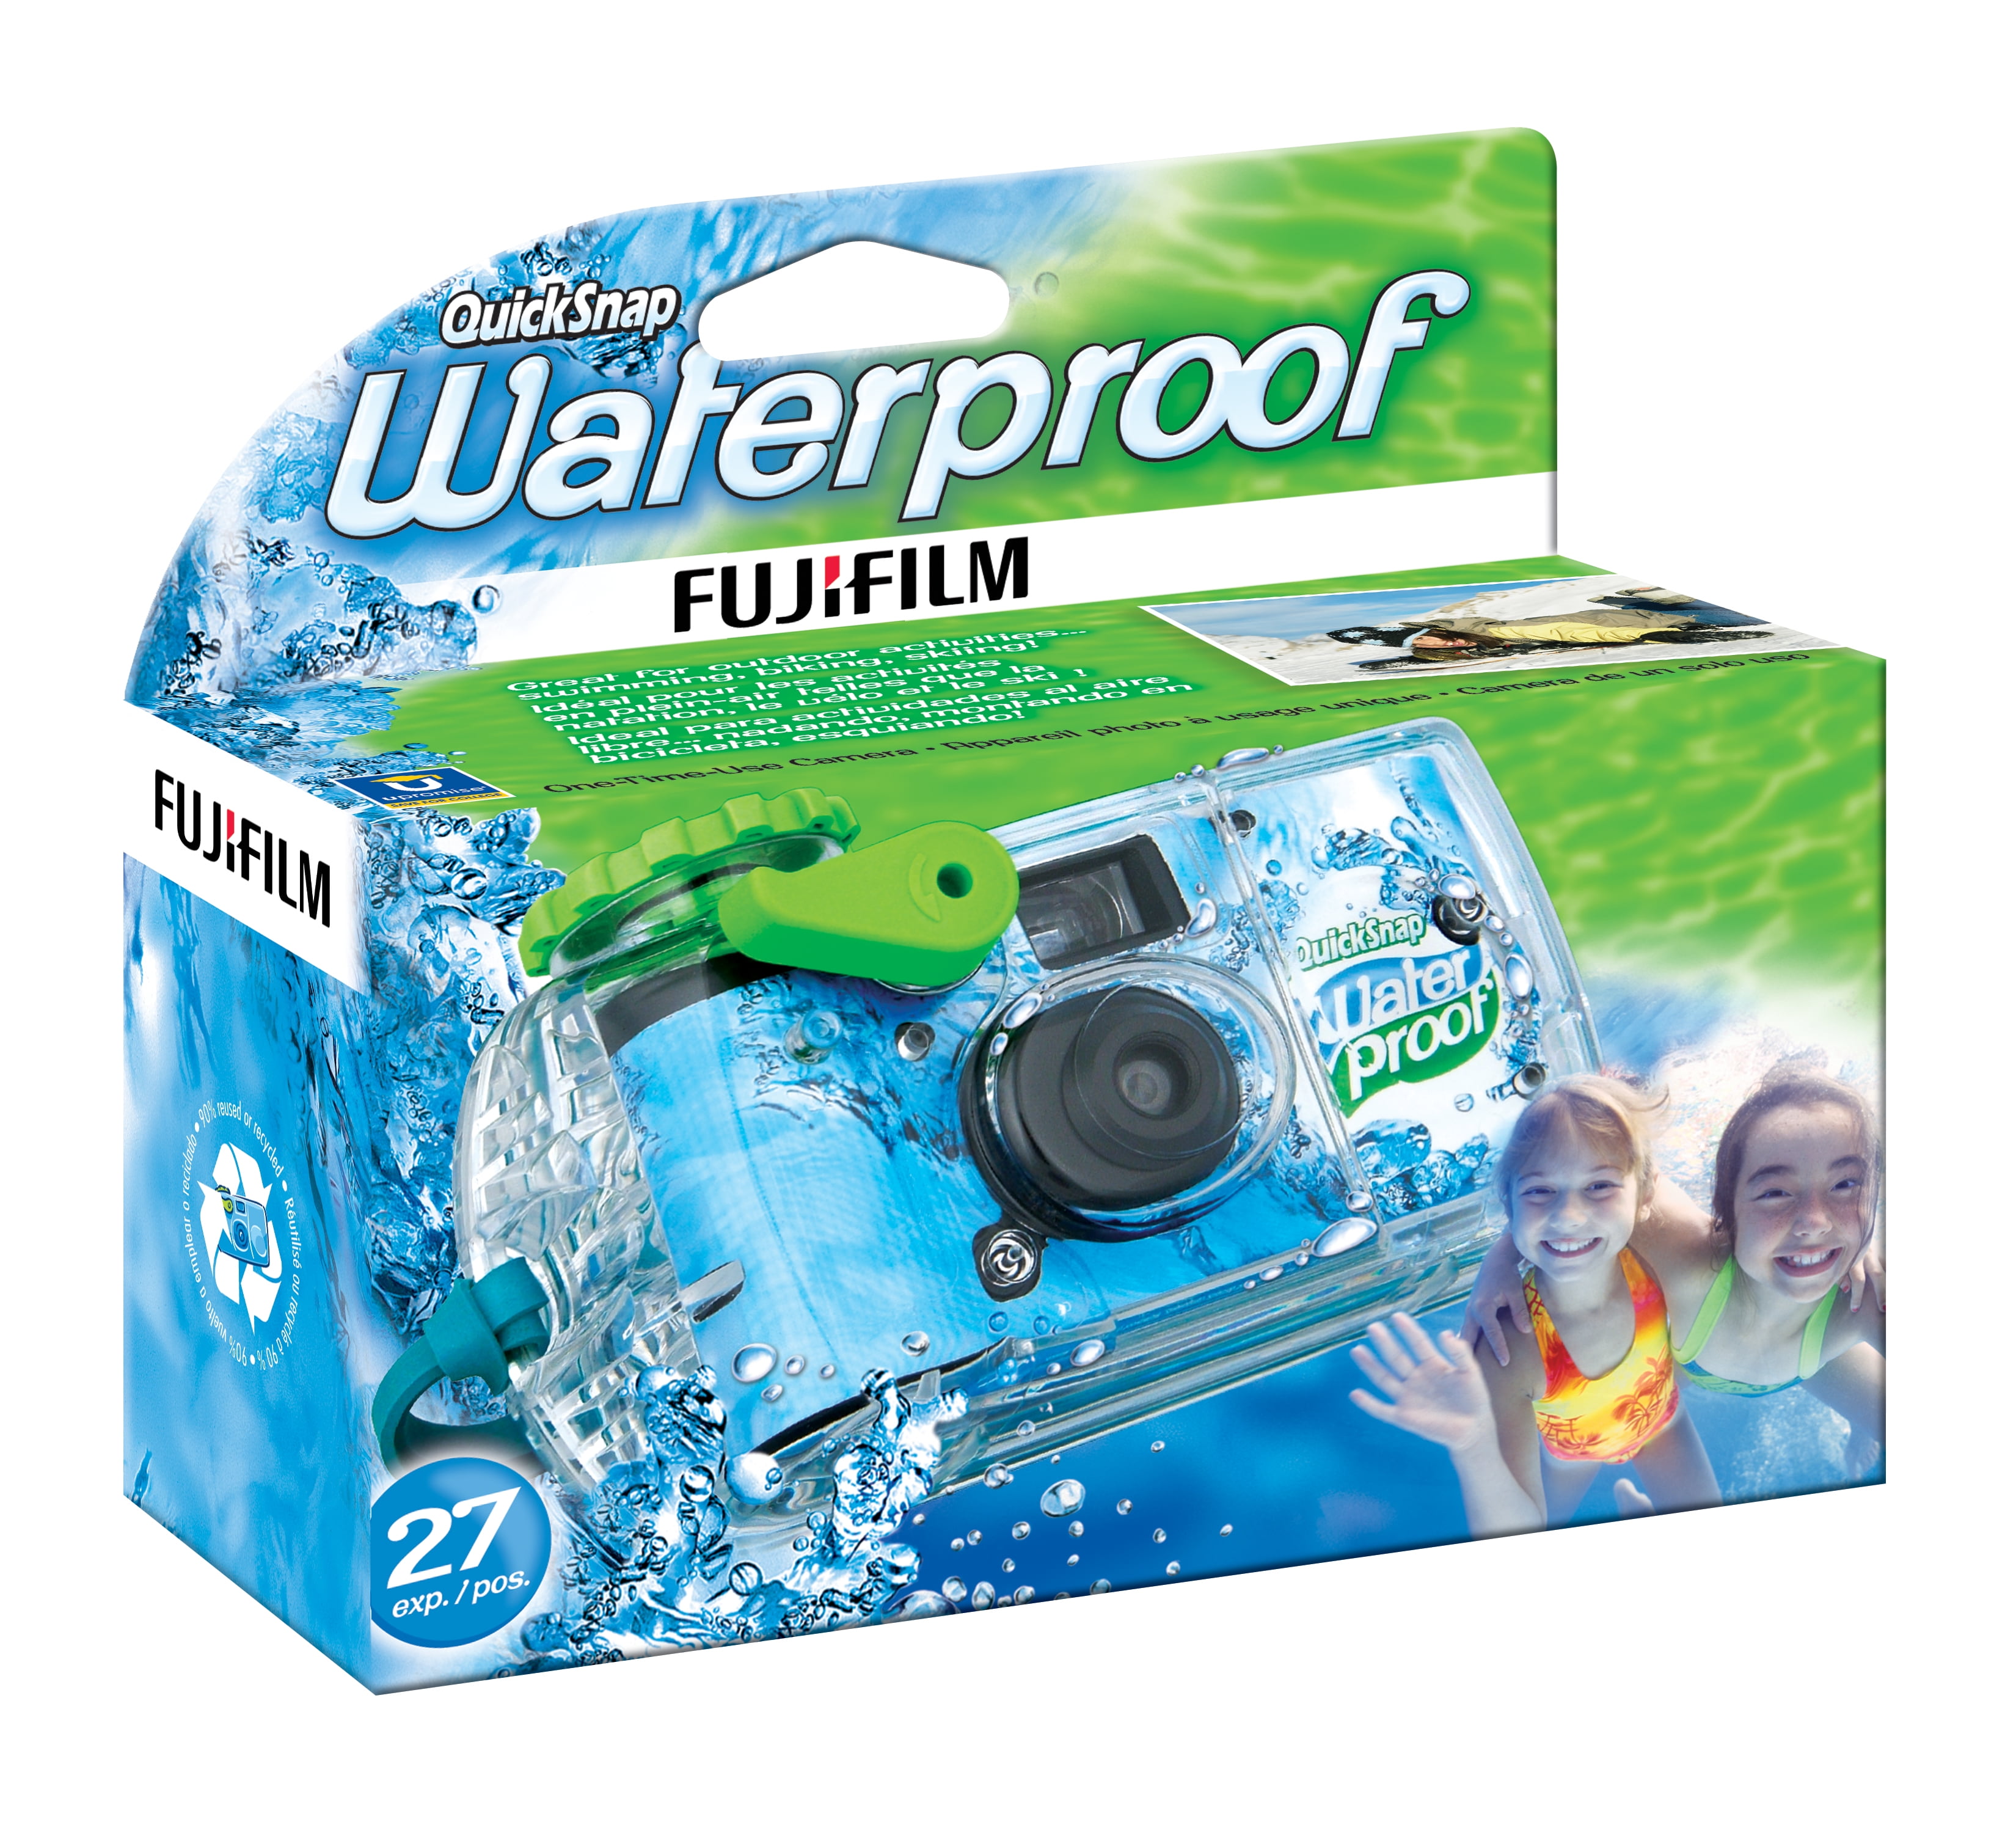 Waterproof Pool Underwater Camera Both Single Use and Reloadable Film Use 18 Exposure Film Included SK CASA 35mm Film Disposable 